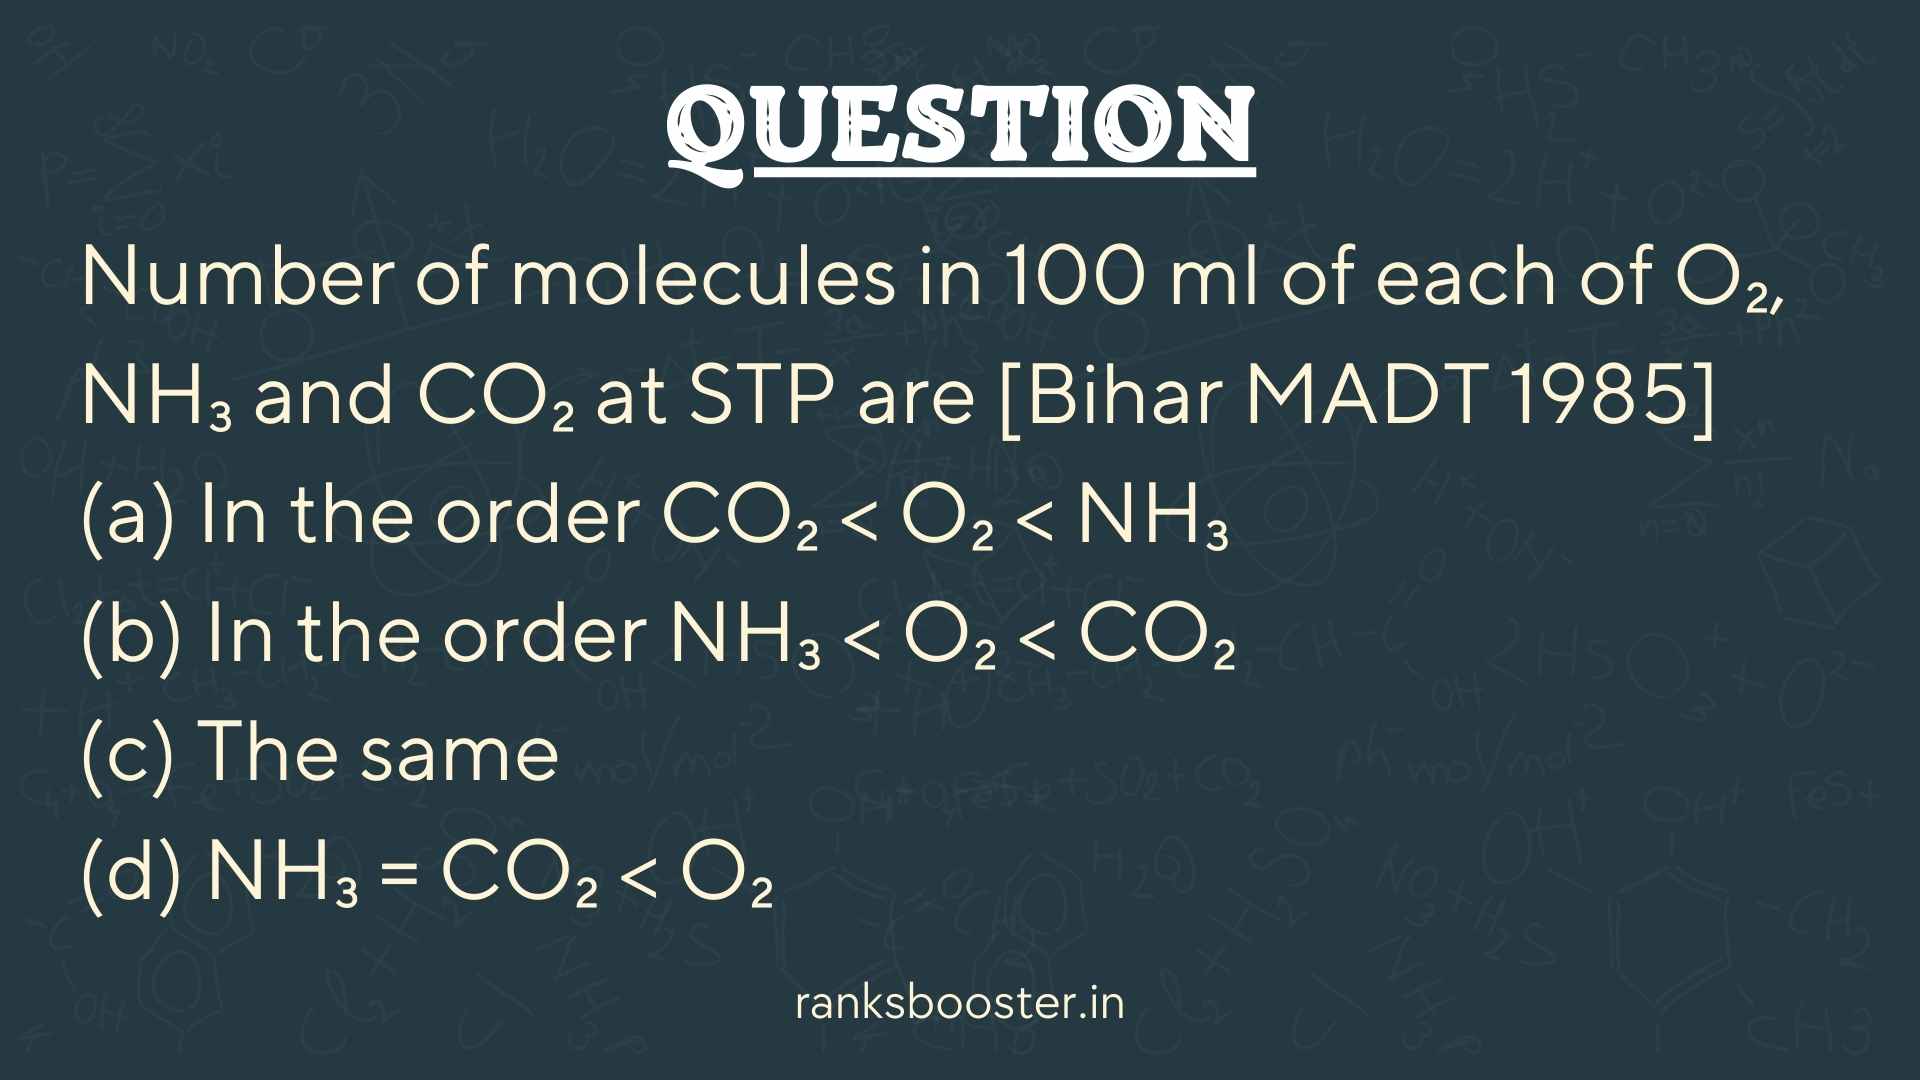 Number of molecules in 100 ml of each of O₂, NH₃ and CO₂ at STP are [Bihar MADT 1985] (a) In the order CO₂ < O₂ < NH₃ (b) In the order NH₃ < O₂ < CO₂ (c) The same (d) NH₃ = CO₂ < O₂